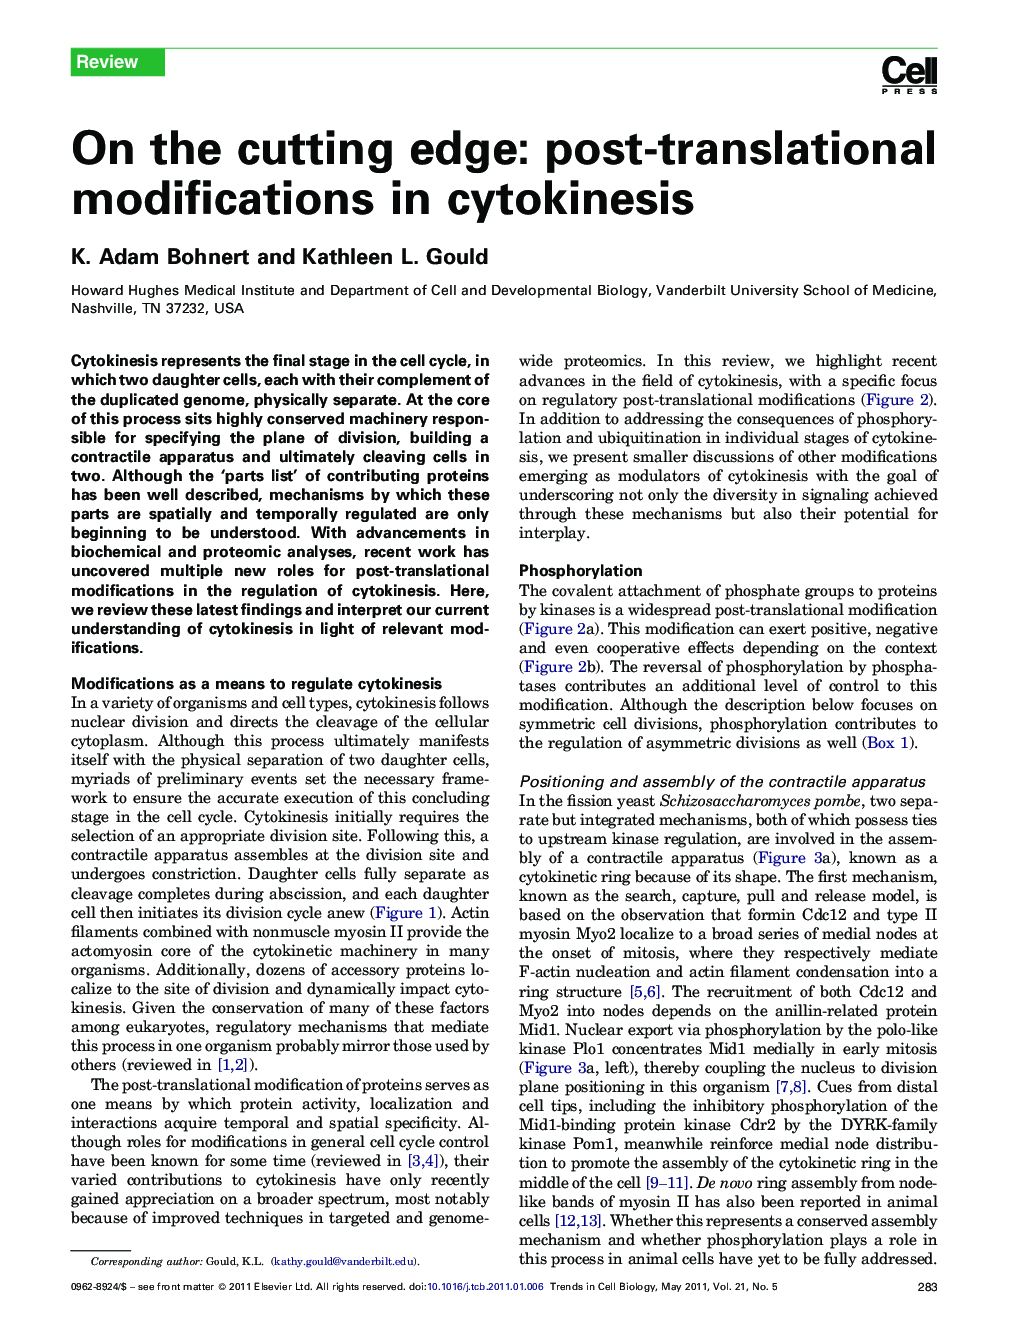 On the cutting edge: post-translational modifications in cytokinesis